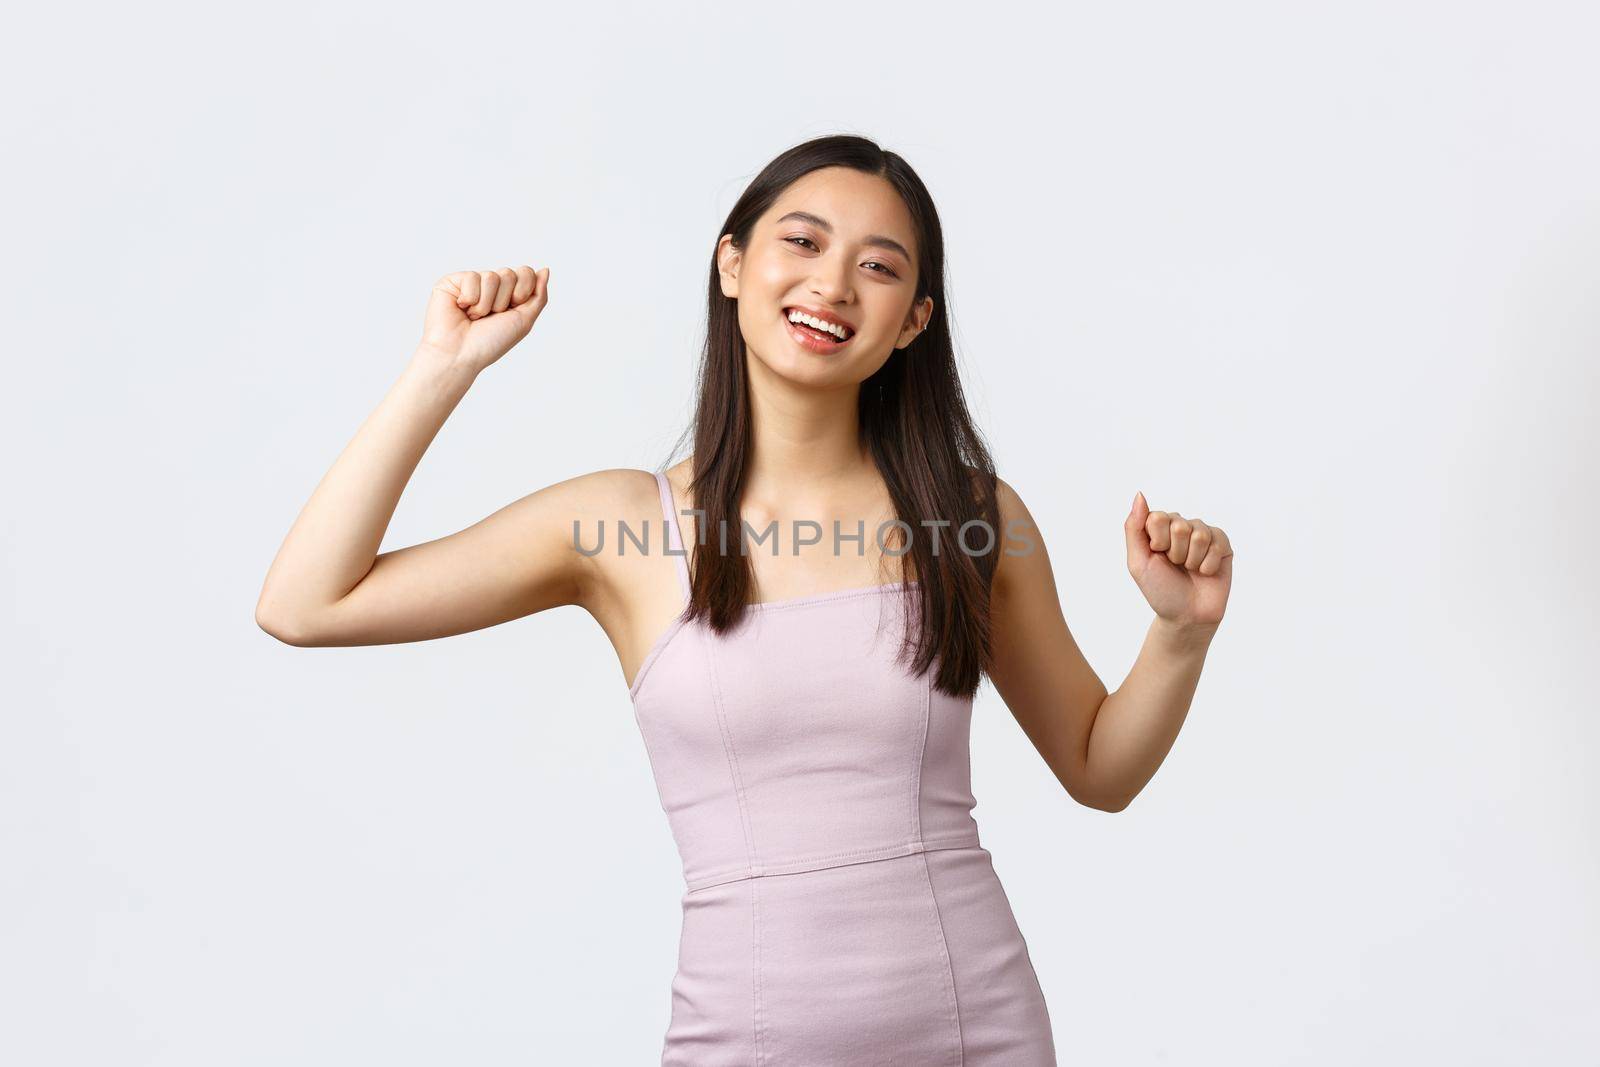 Luxury women, party and holidays concept. Happy excited smiling asian woman do winner dance, become champion, celebrating success, wearing evening dress, rejoicing over good news.